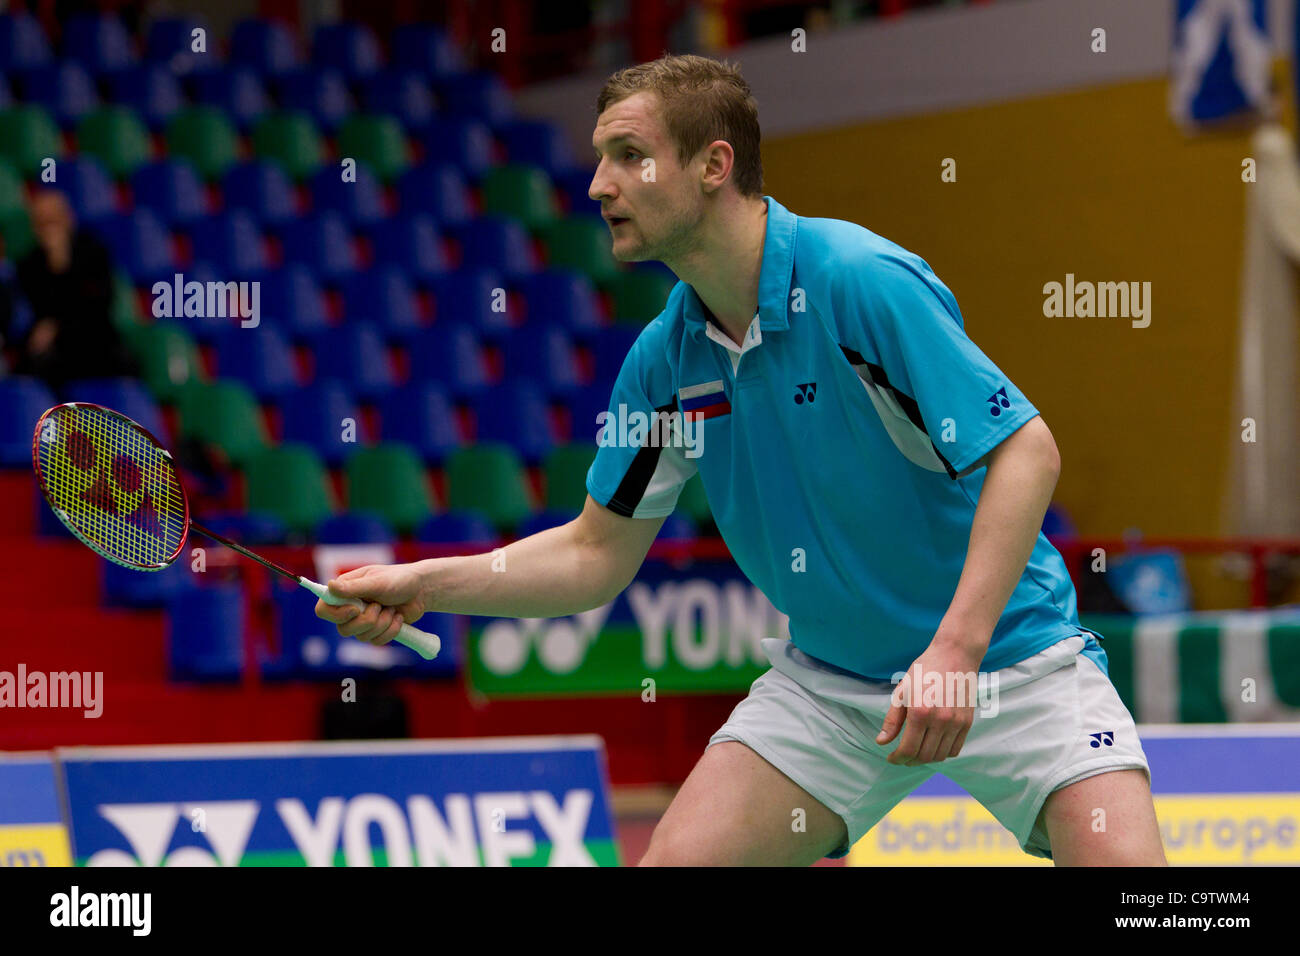 AMSTERDAM, THE NETHERLANDS; 19/02/2012. Badminton player Alexandr Nikolaenko (pictured) and his partner Vitalij Durkin from Russia lose their match against the English in the bronze medal match of the European Team Championships Badminton 2012 in Amsterdam. Stock Photo